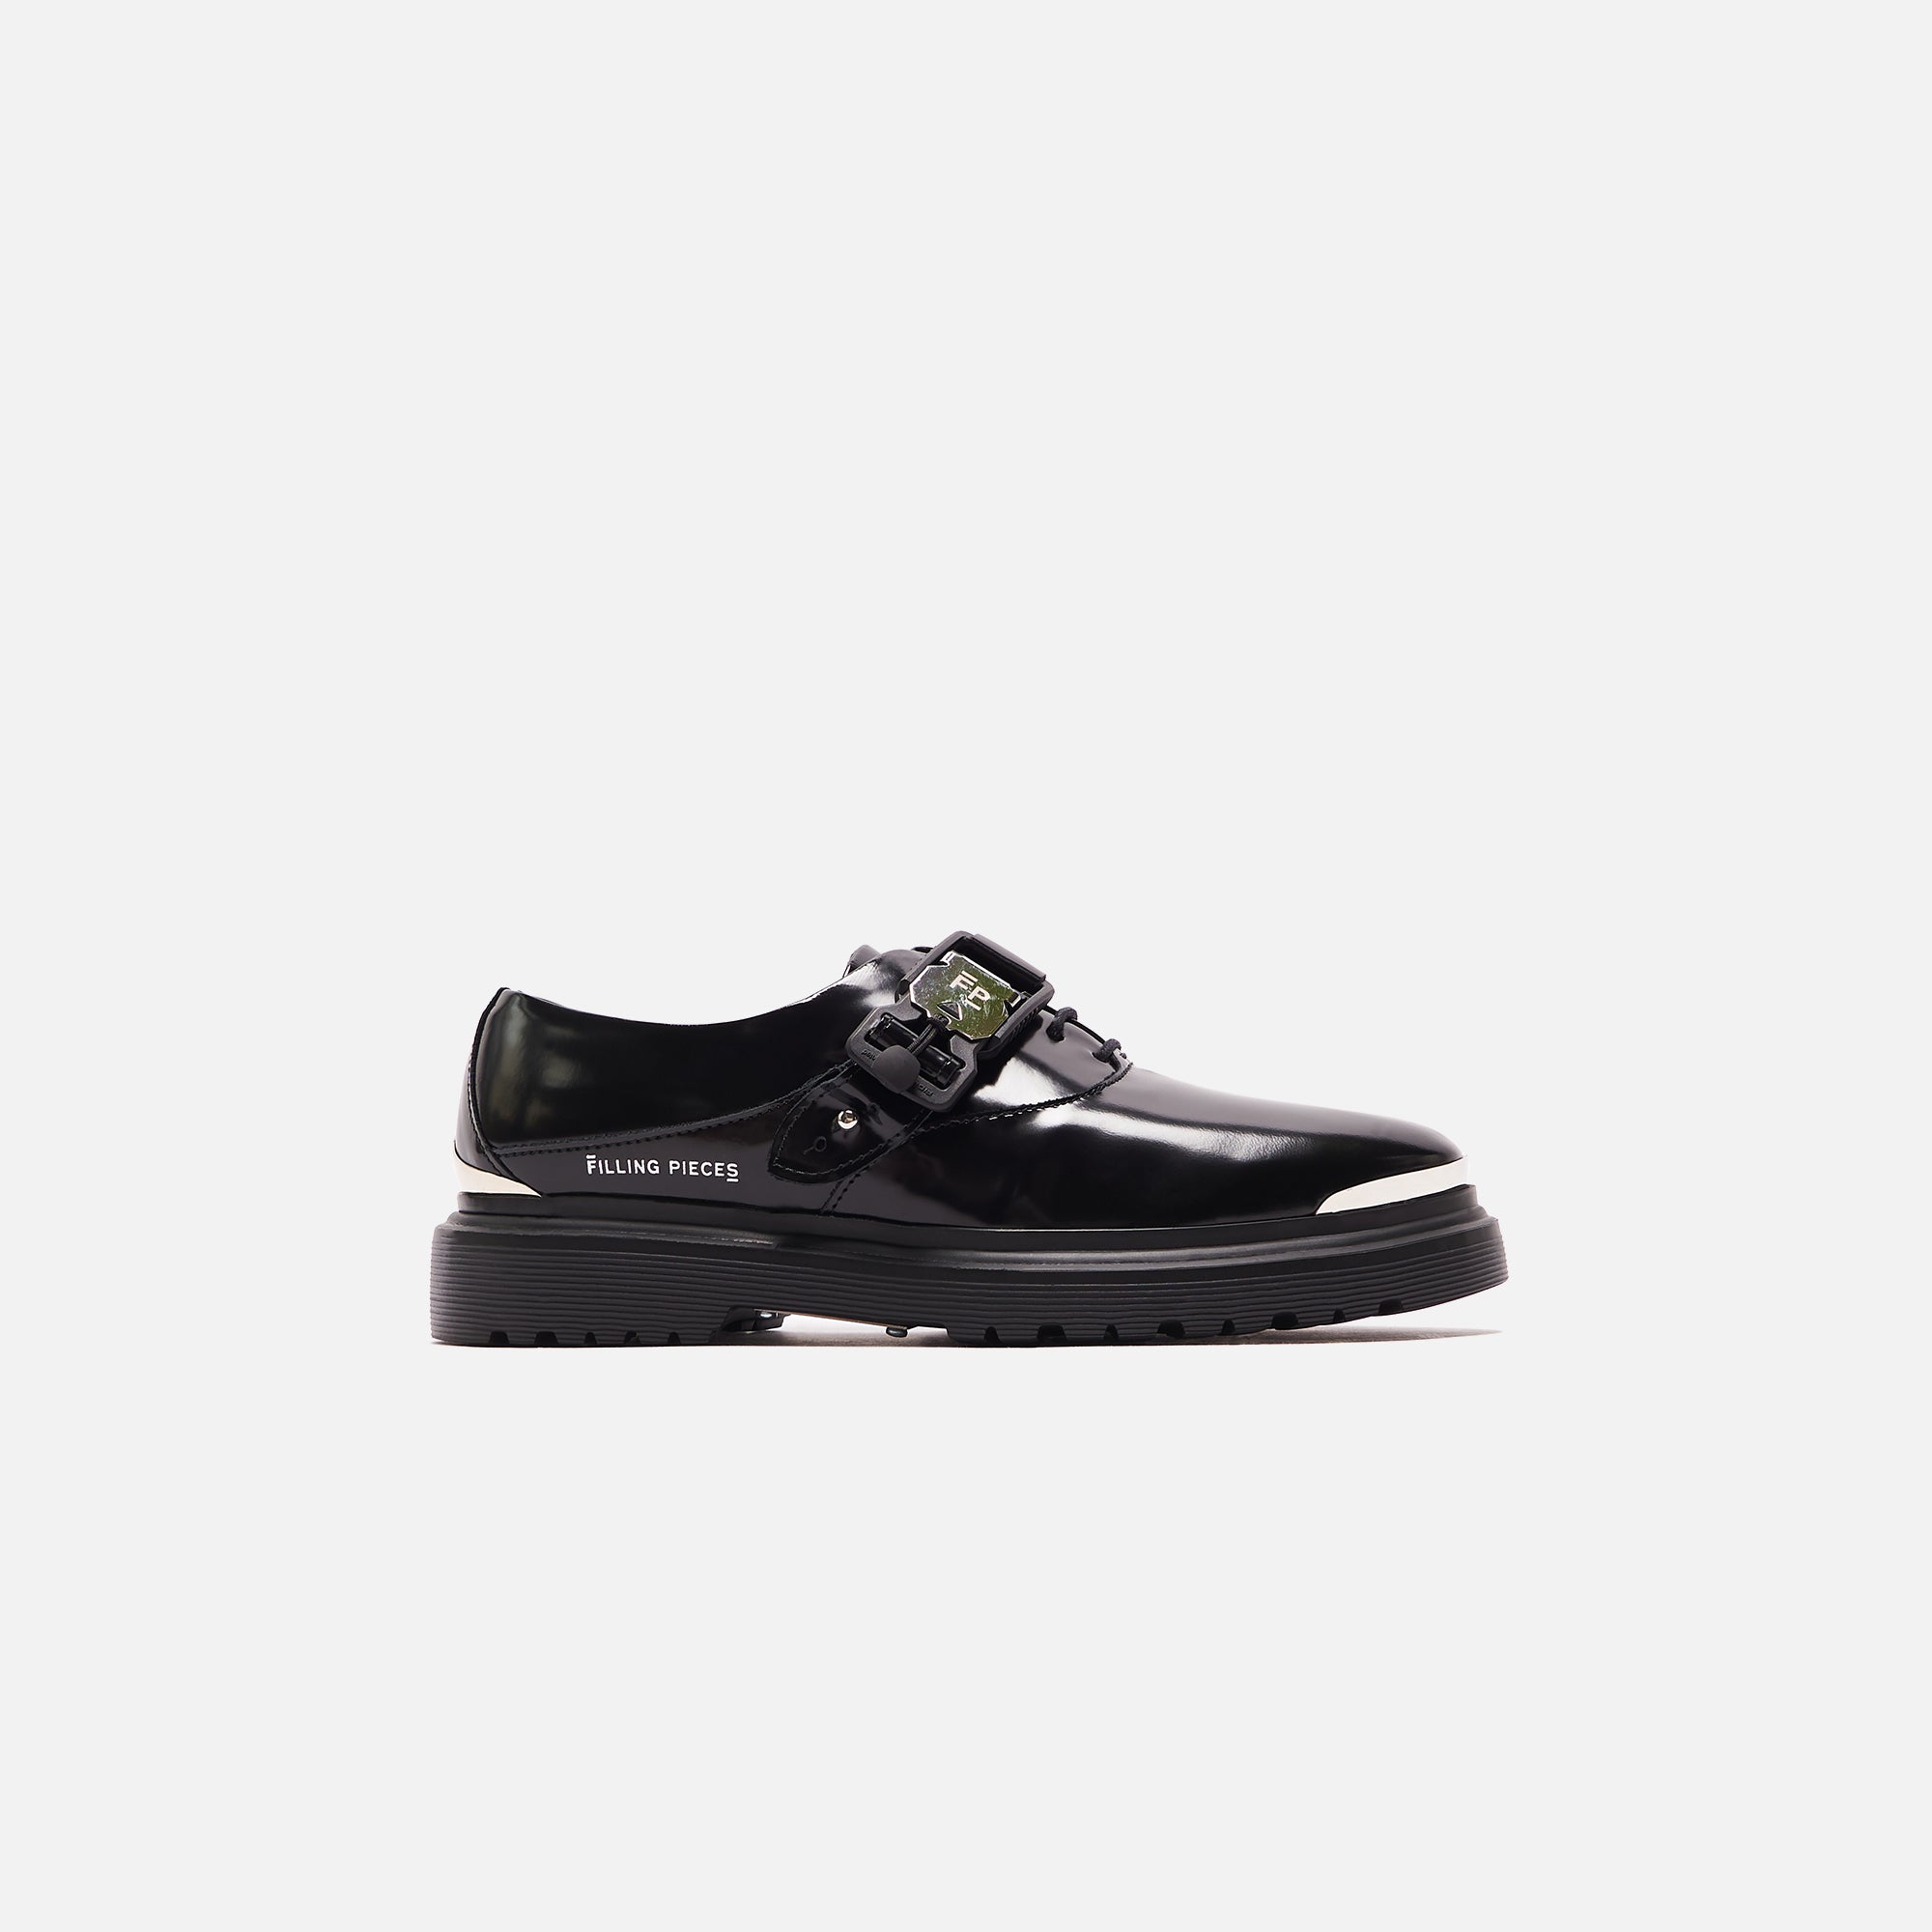 Filling Pieces Waspy Dress Up - Black – Kith